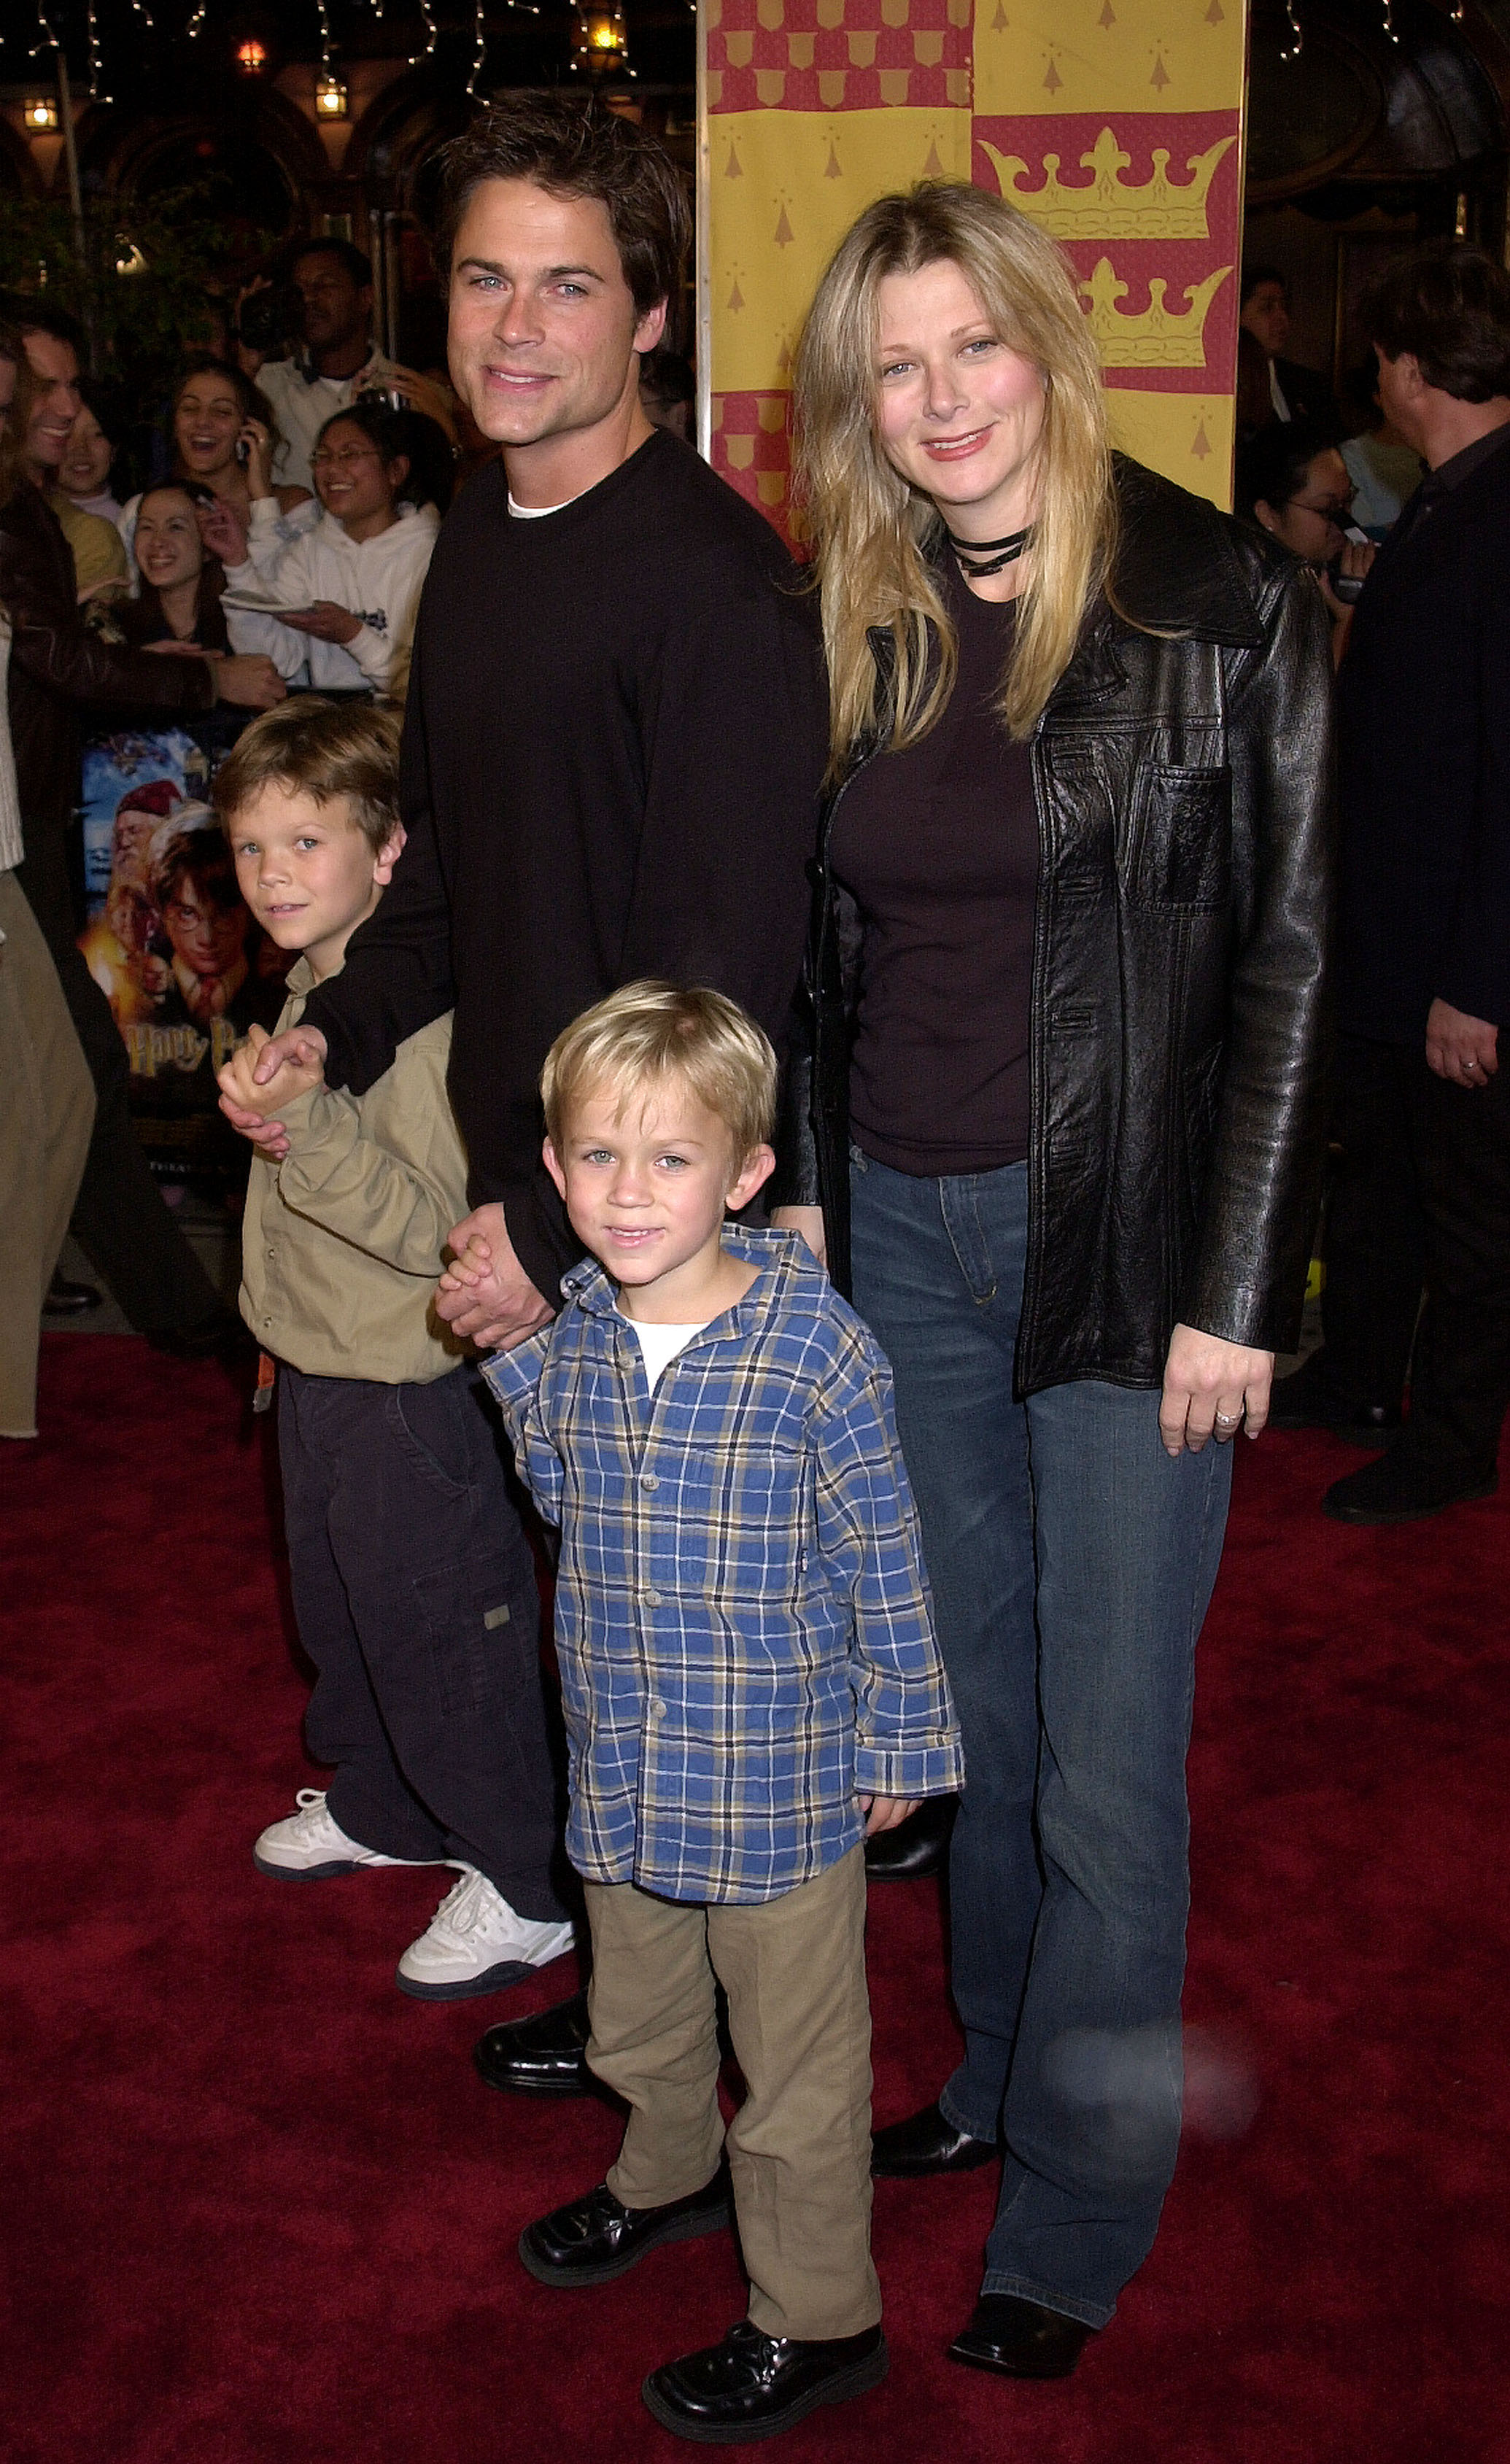 Rob Lowe, Sheryl Berkoff and their children at the "Harry Potter and The Sorcerer's Stone" Los Angeles Premiere | Source: Getty Images